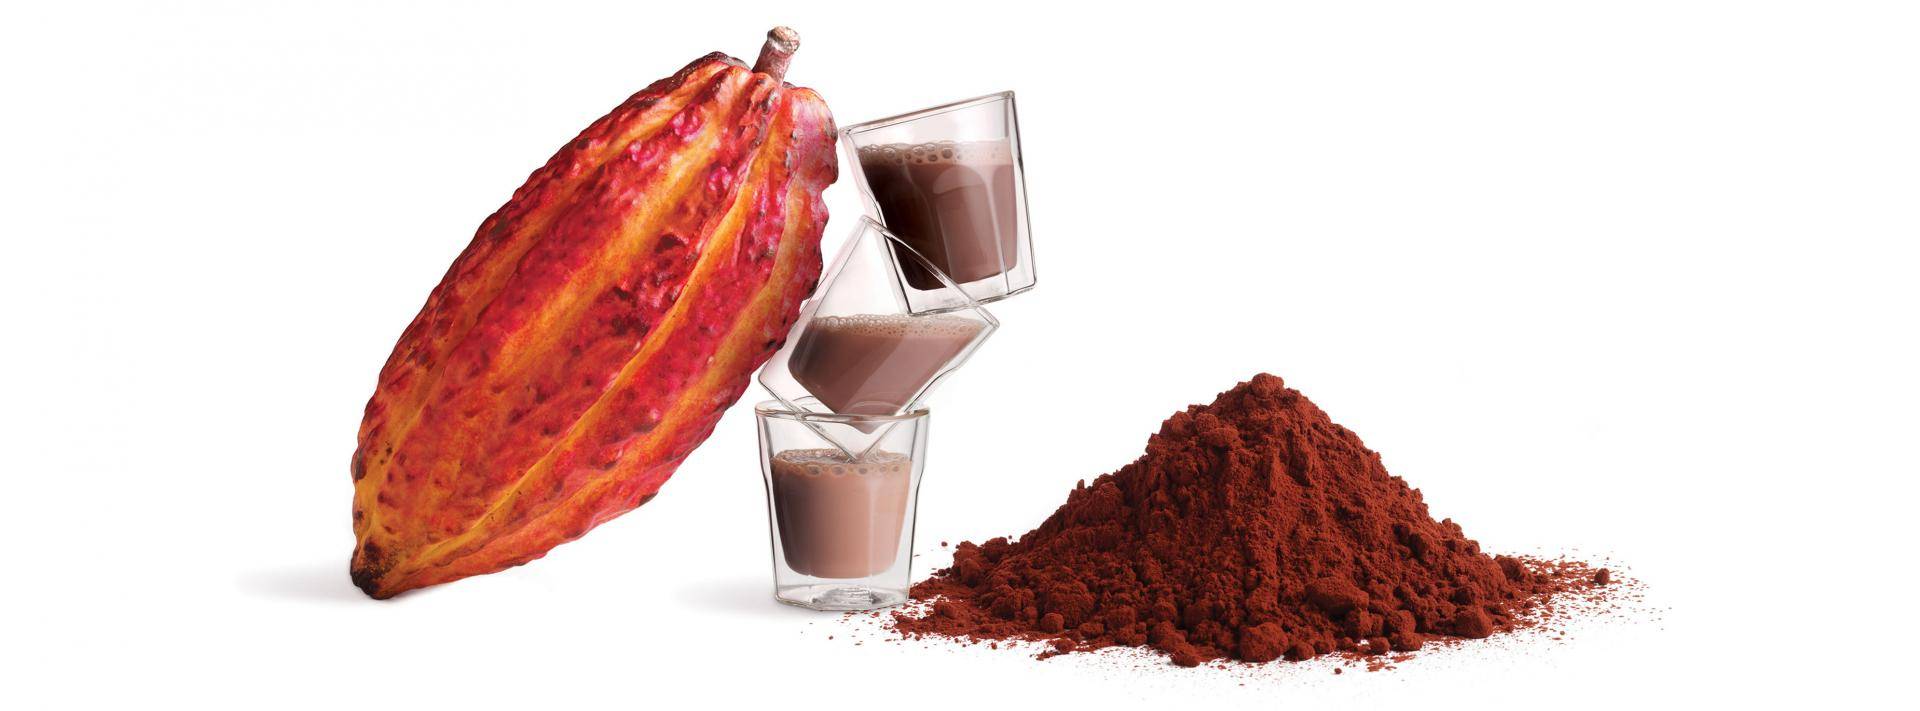 Bensdorp the finest cocoa powders for Dairy & Drinks applications